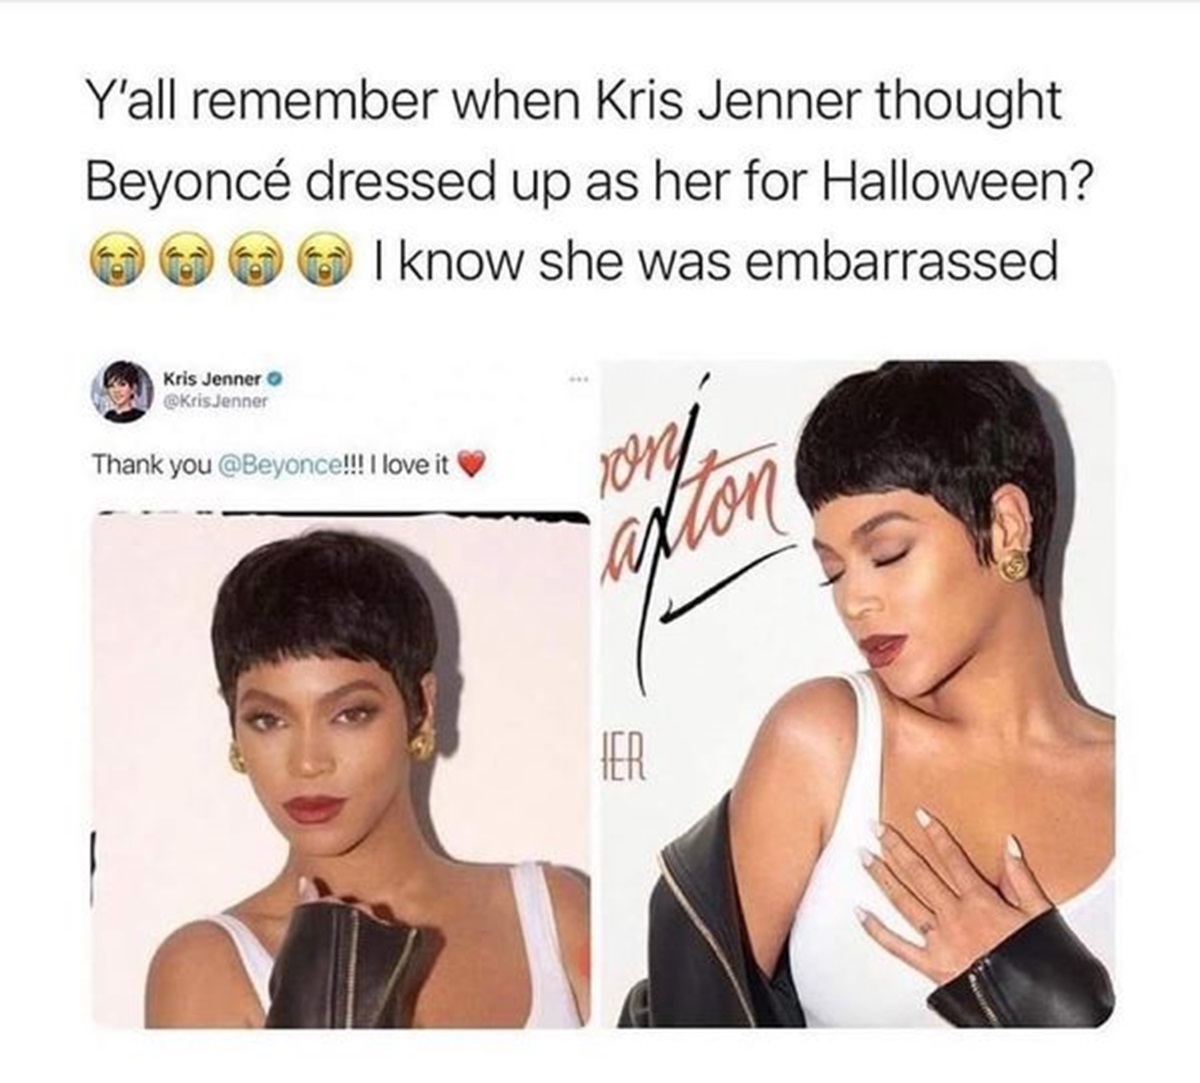 beyonce halloween costume kris jenner - Y'all remember when Kris Jenner thought Beyonc dressed up as her for Halloween? I know she was embarrassed Kris Jenner Jenner Thank you !!! I love it Ton apton Ier